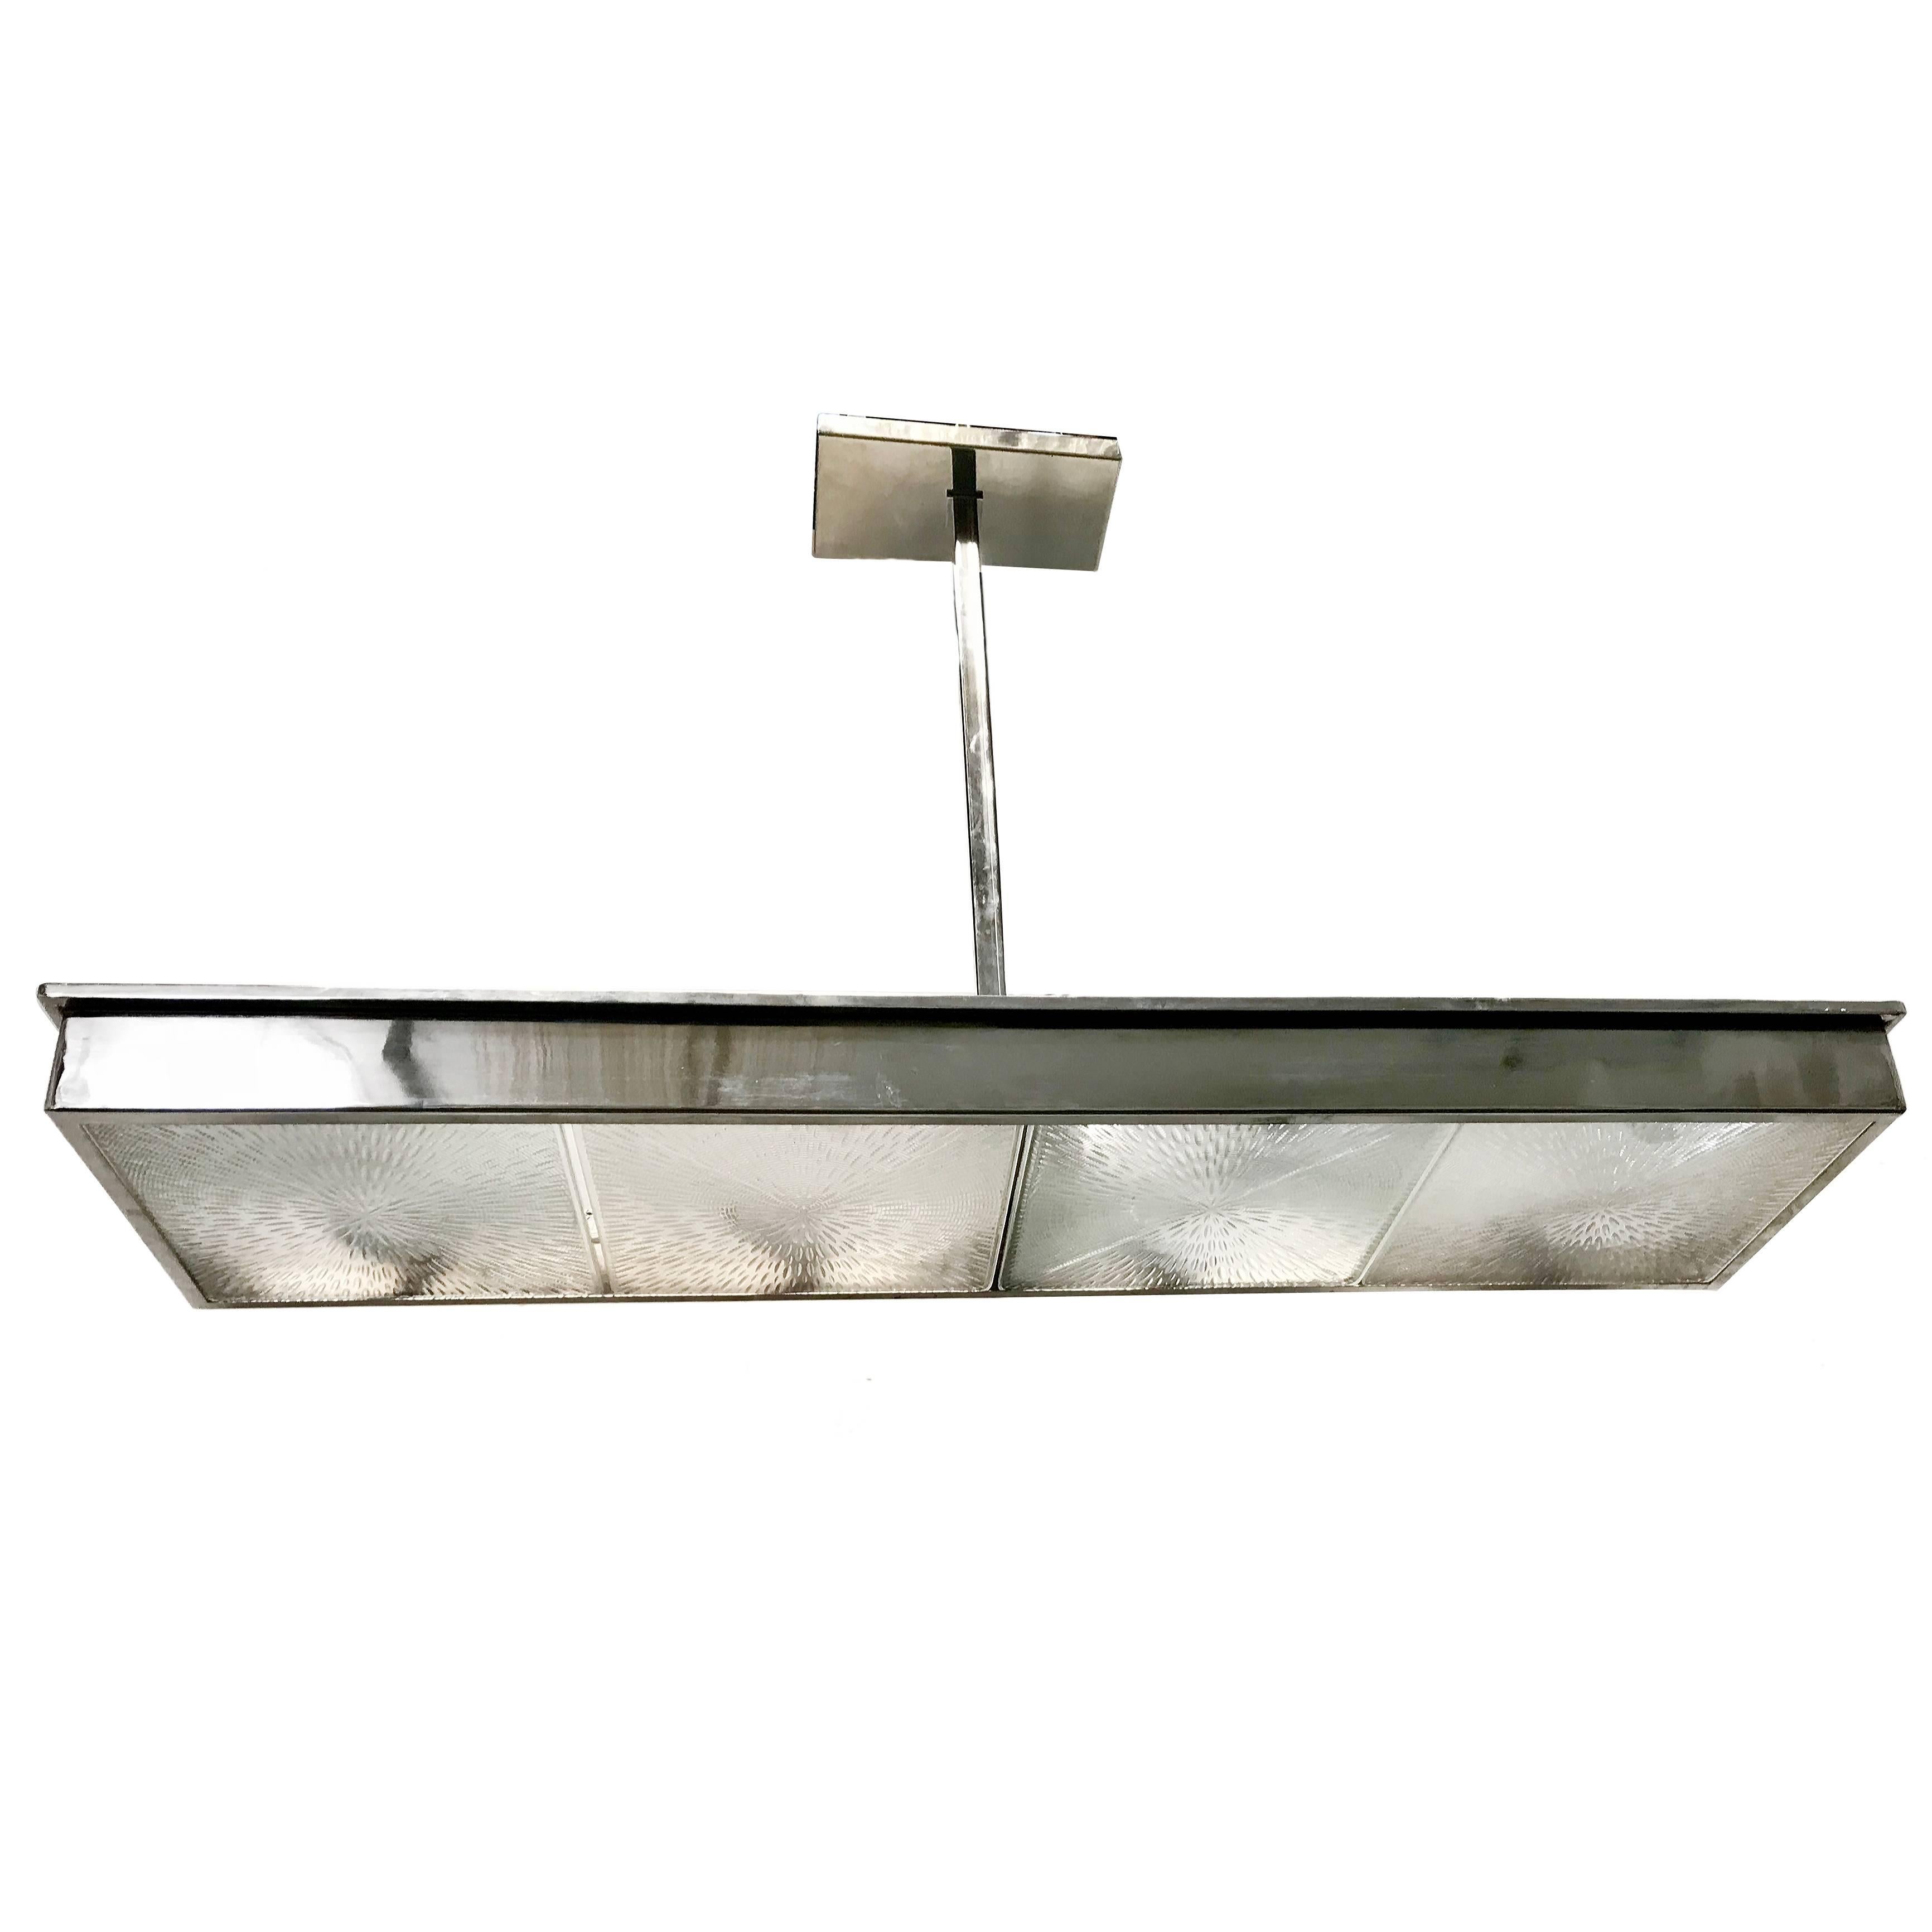 A circa 1960s French large horizontal nickel-plated light fixture with molded glass insets.

Measurements:
Drop: 41.25